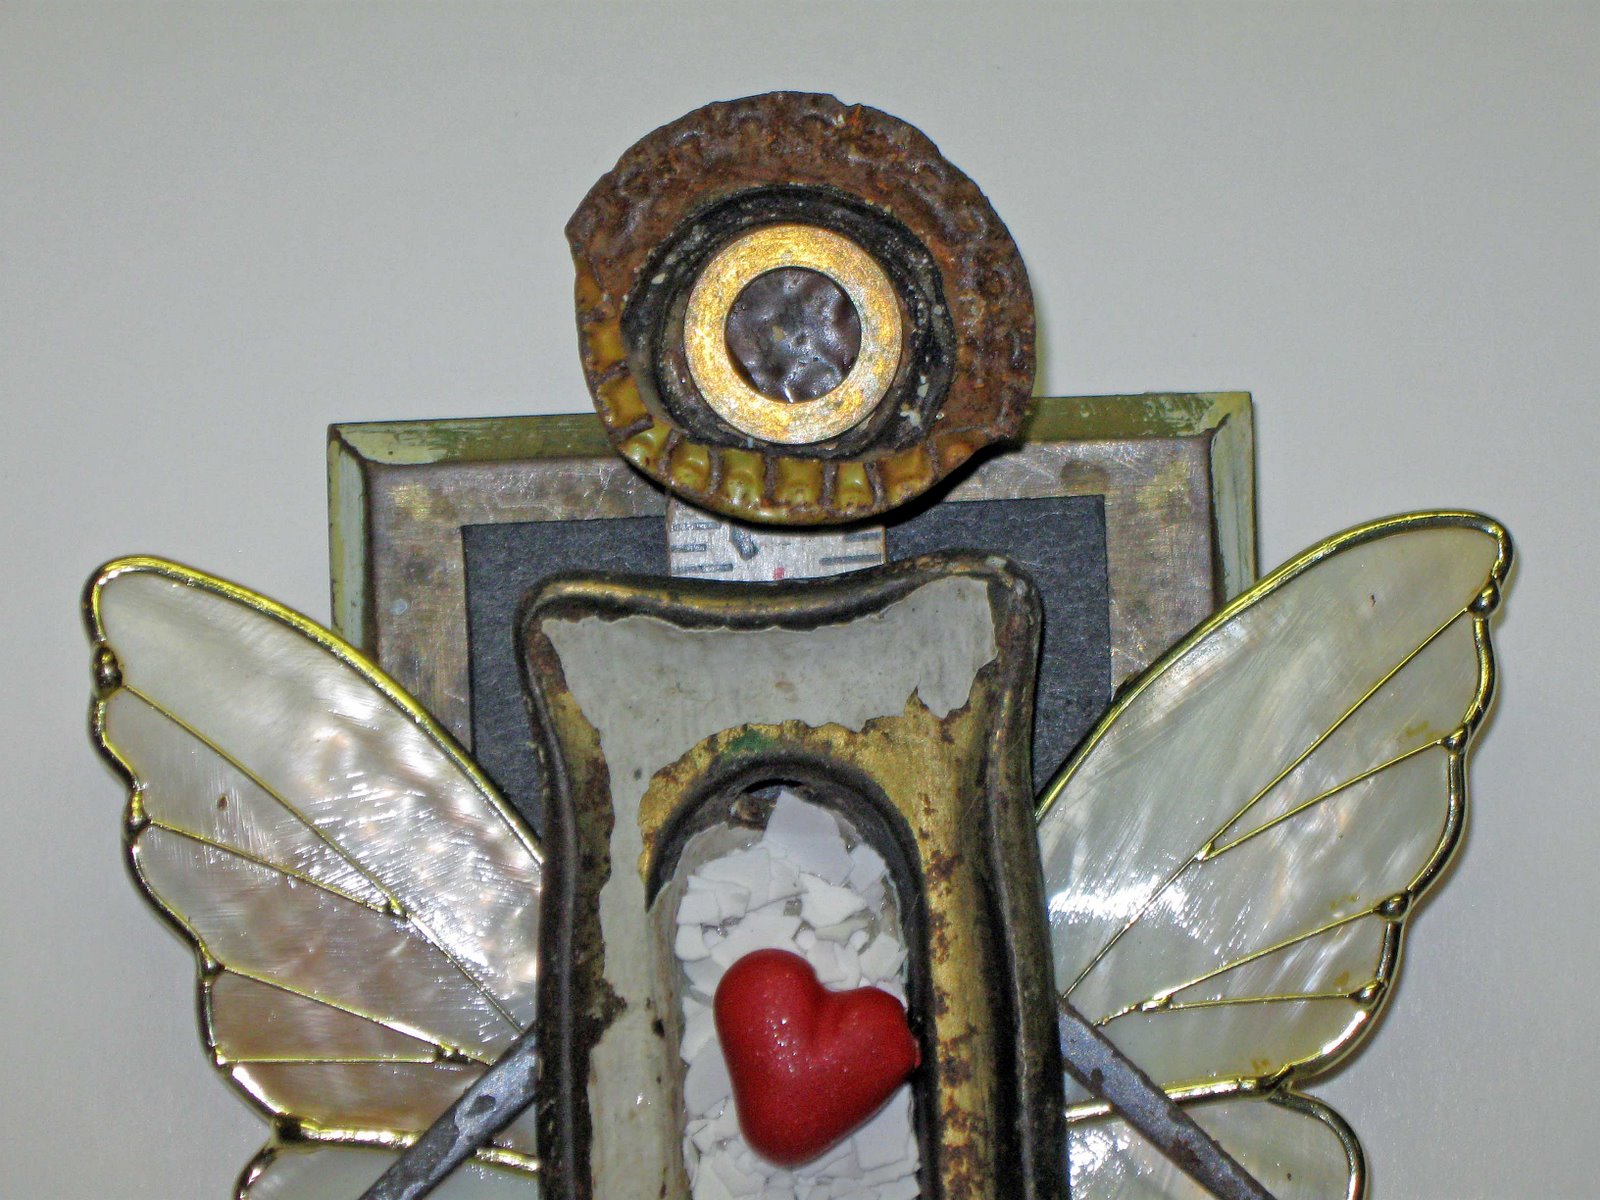 [assemblage+-+angel+with+red+heart+-upclose+-.jpg]